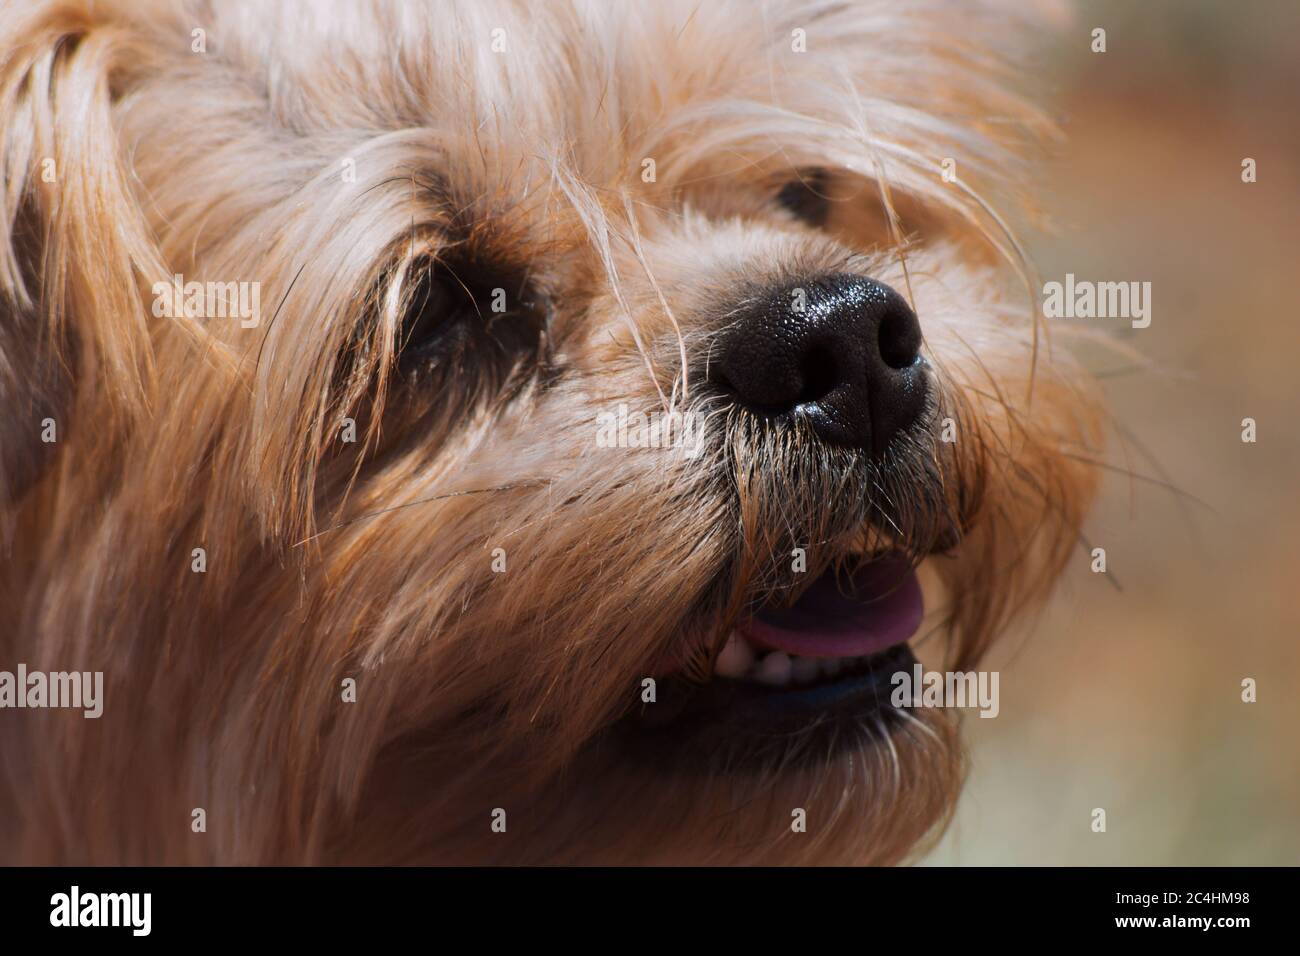 The joyful face of the Yorkshire Terrier close-up Stock Photo